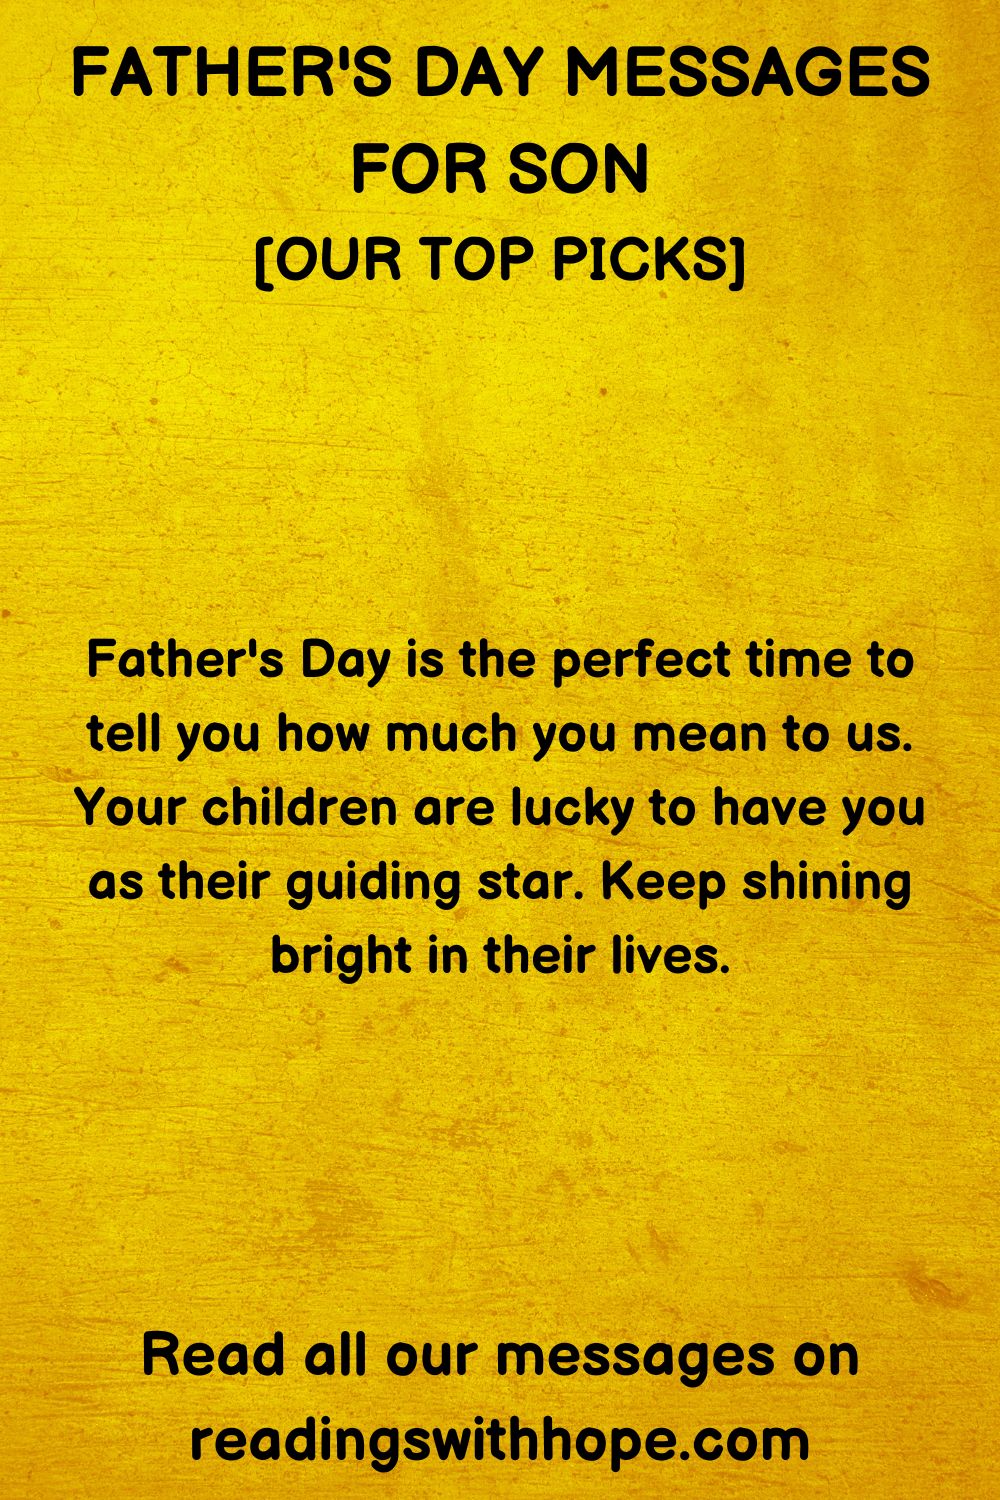 37 Father's Day Messages For Son